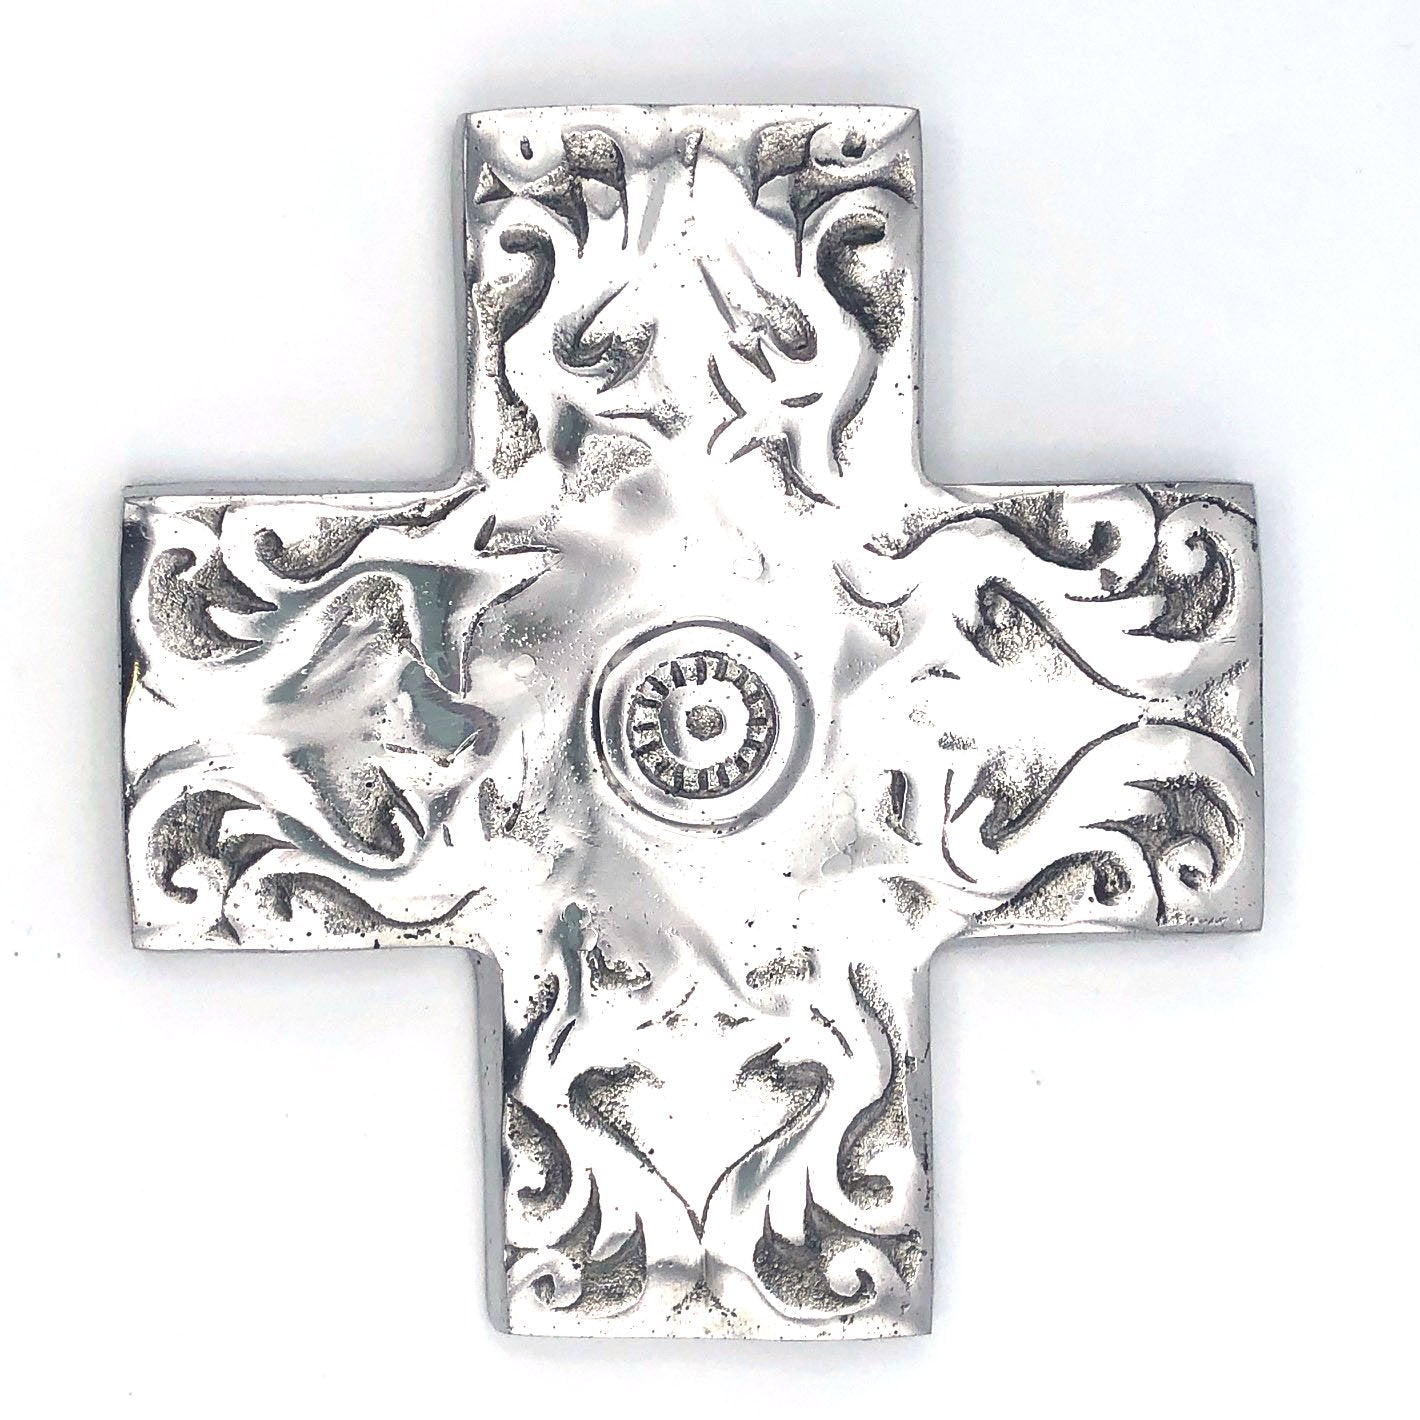 Recycled Aluminum Scrolled Cross